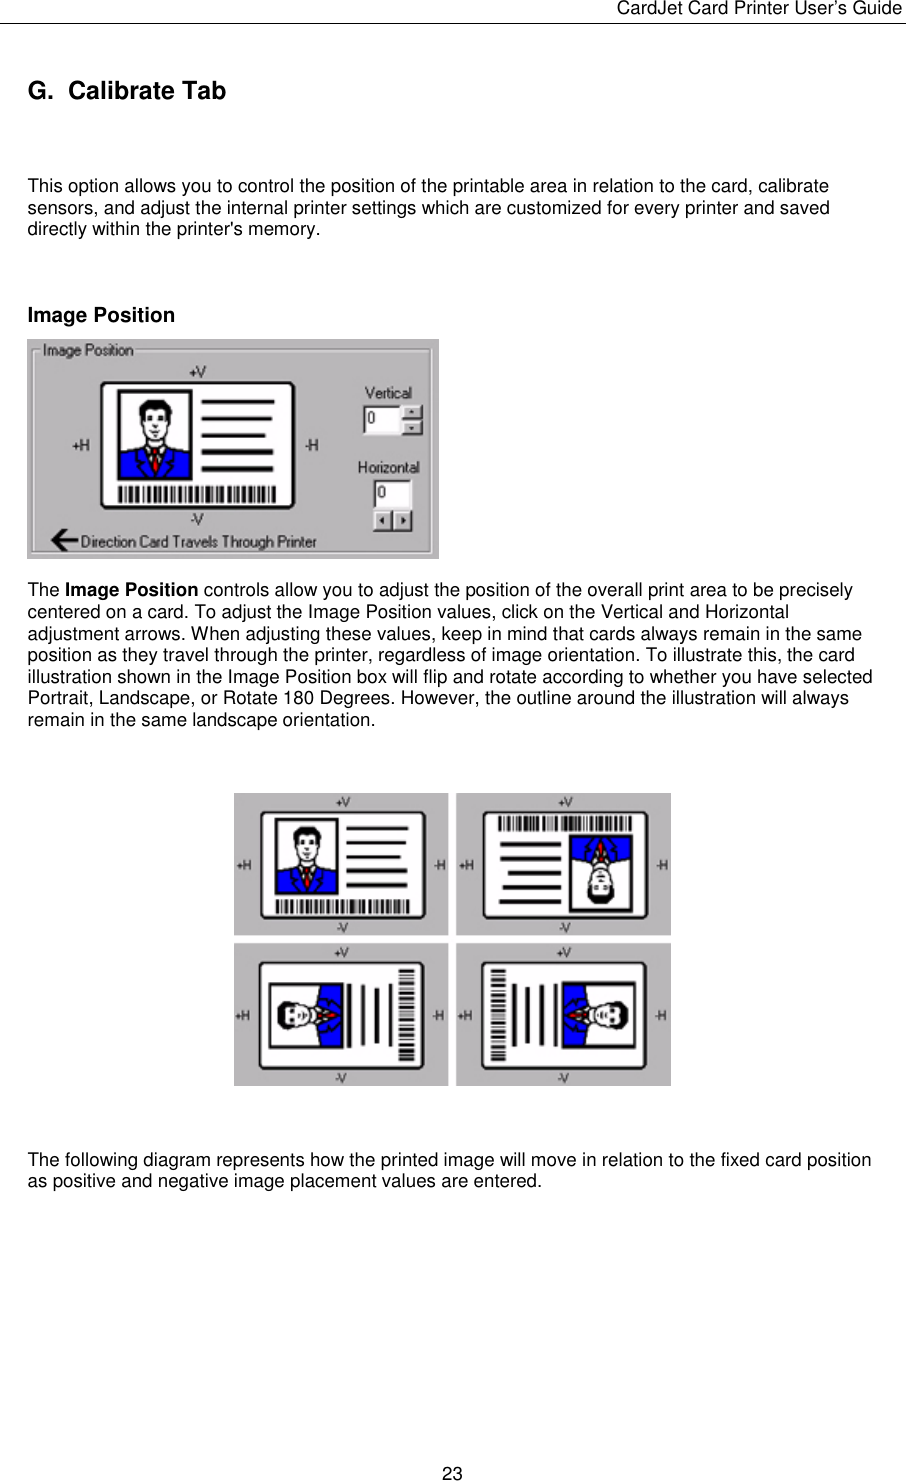 CardJet Card Printer User’s Guide  23 G.  Calibrate Tab  This option allows you to control the position of the printable area in relation to the card, calibrate sensors, and adjust the internal printer settings which are customized for every printer and saved directly within the printer&apos;s memory.   Image Position  The Image Position controls allow you to adjust the position of the overall print area to be precisely centered on a card. To adjust the Image Position values, click on the Vertical and Horizontal adjustment arrows. When adjusting these values, keep in mind that cards always remain in the same position as they travel through the printer, regardless of image orientation. To illustrate this, the card illustration shown in the Image Position box will flip and rotate according to whether you have selected Portrait, Landscape, or Rotate 180 Degrees. However, the outline around the illustration will always remain in the same landscape orientation.      The following diagram represents how the printed image will move in relation to the fixed card position as positive and negative image placement values are entered.   